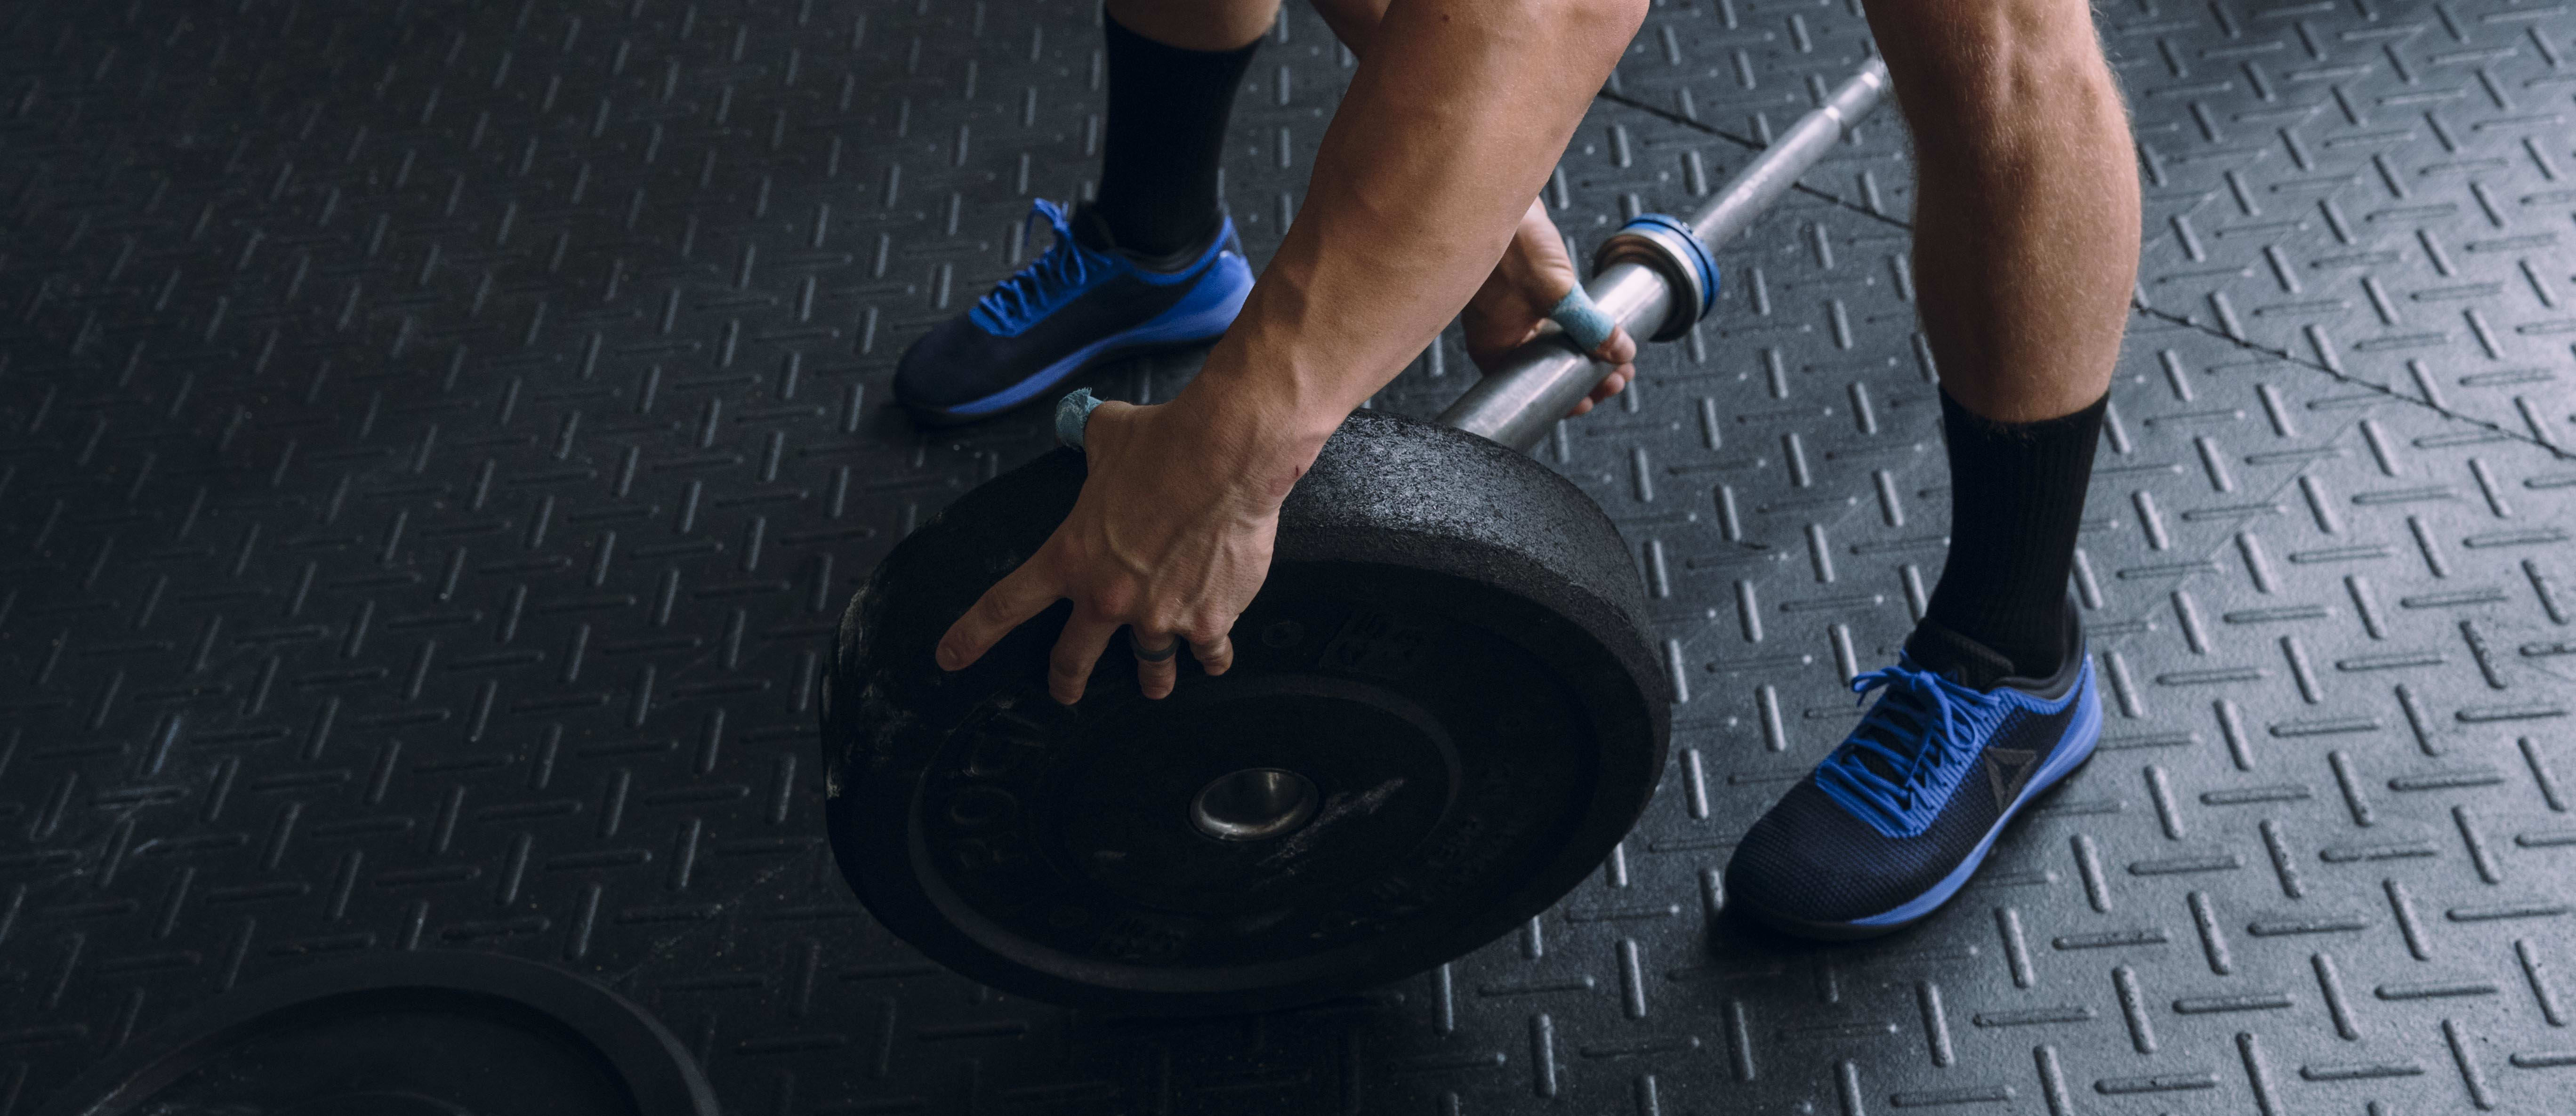 The Best CrossFit Shoes for Men in 2019